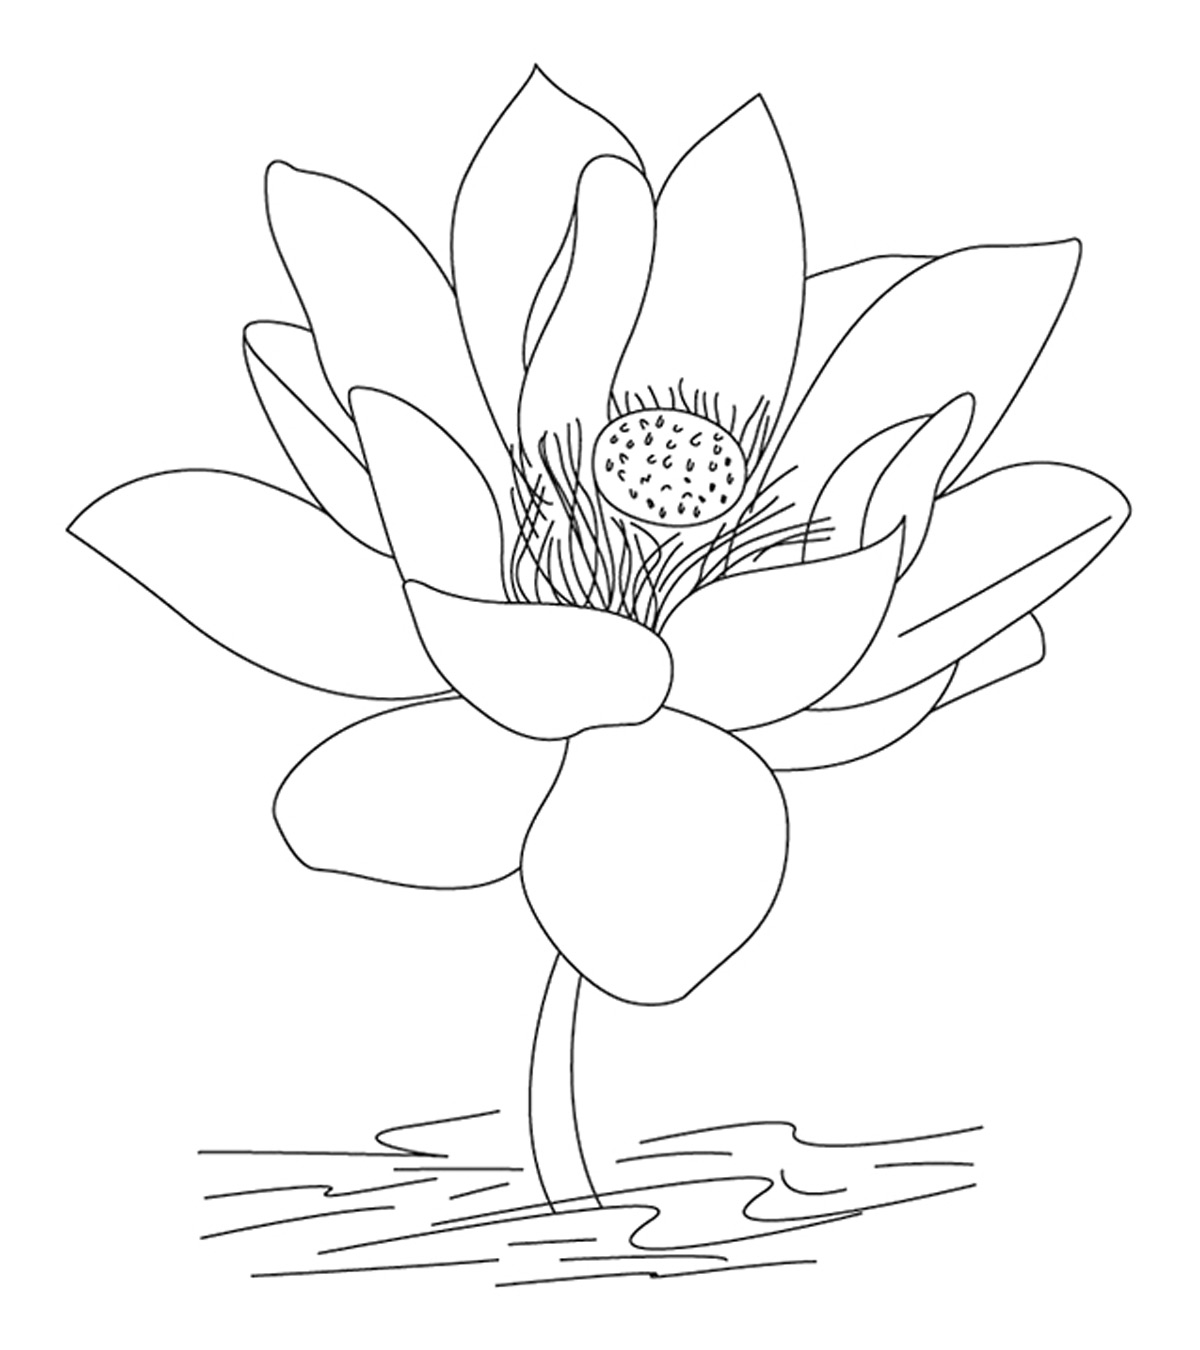 Download Countries Coloring Pages - MomJunction